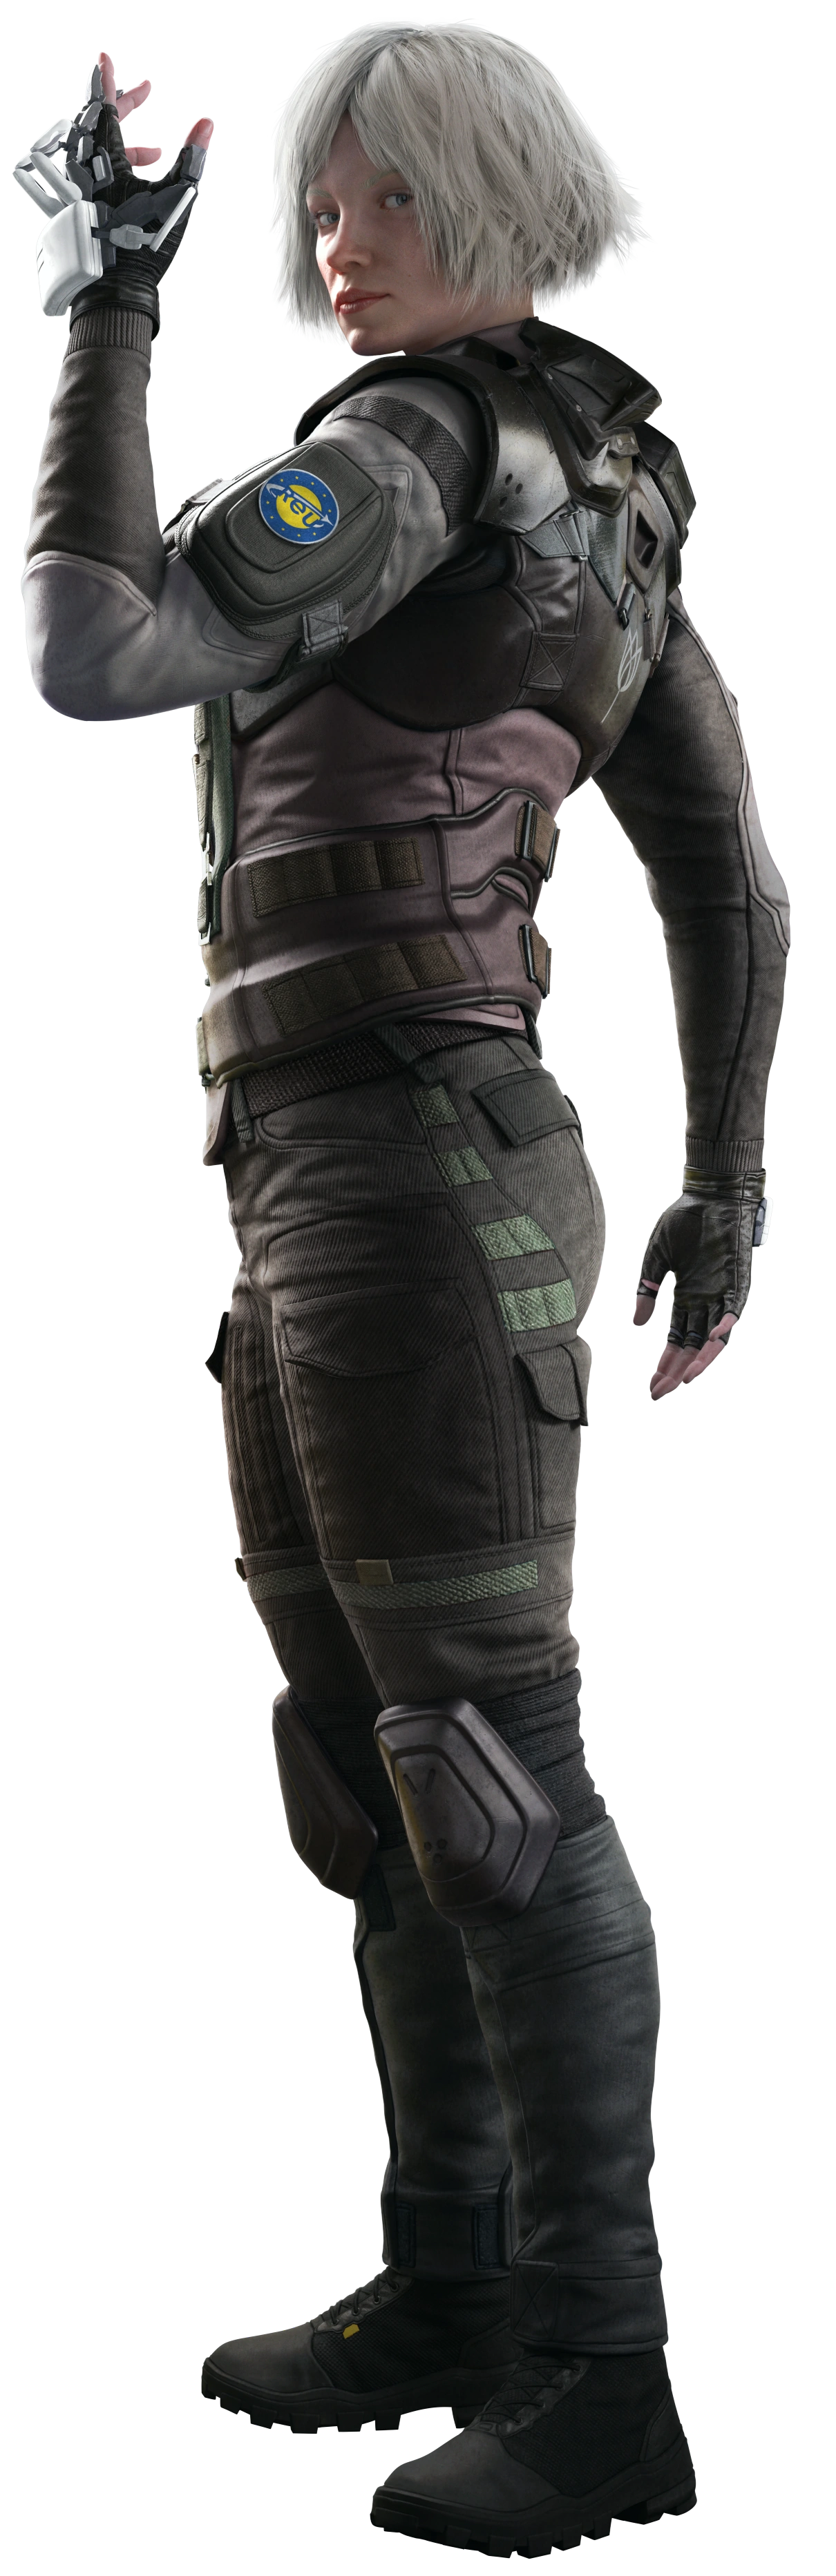 Rainbow Six Siege mobile gamelounge character